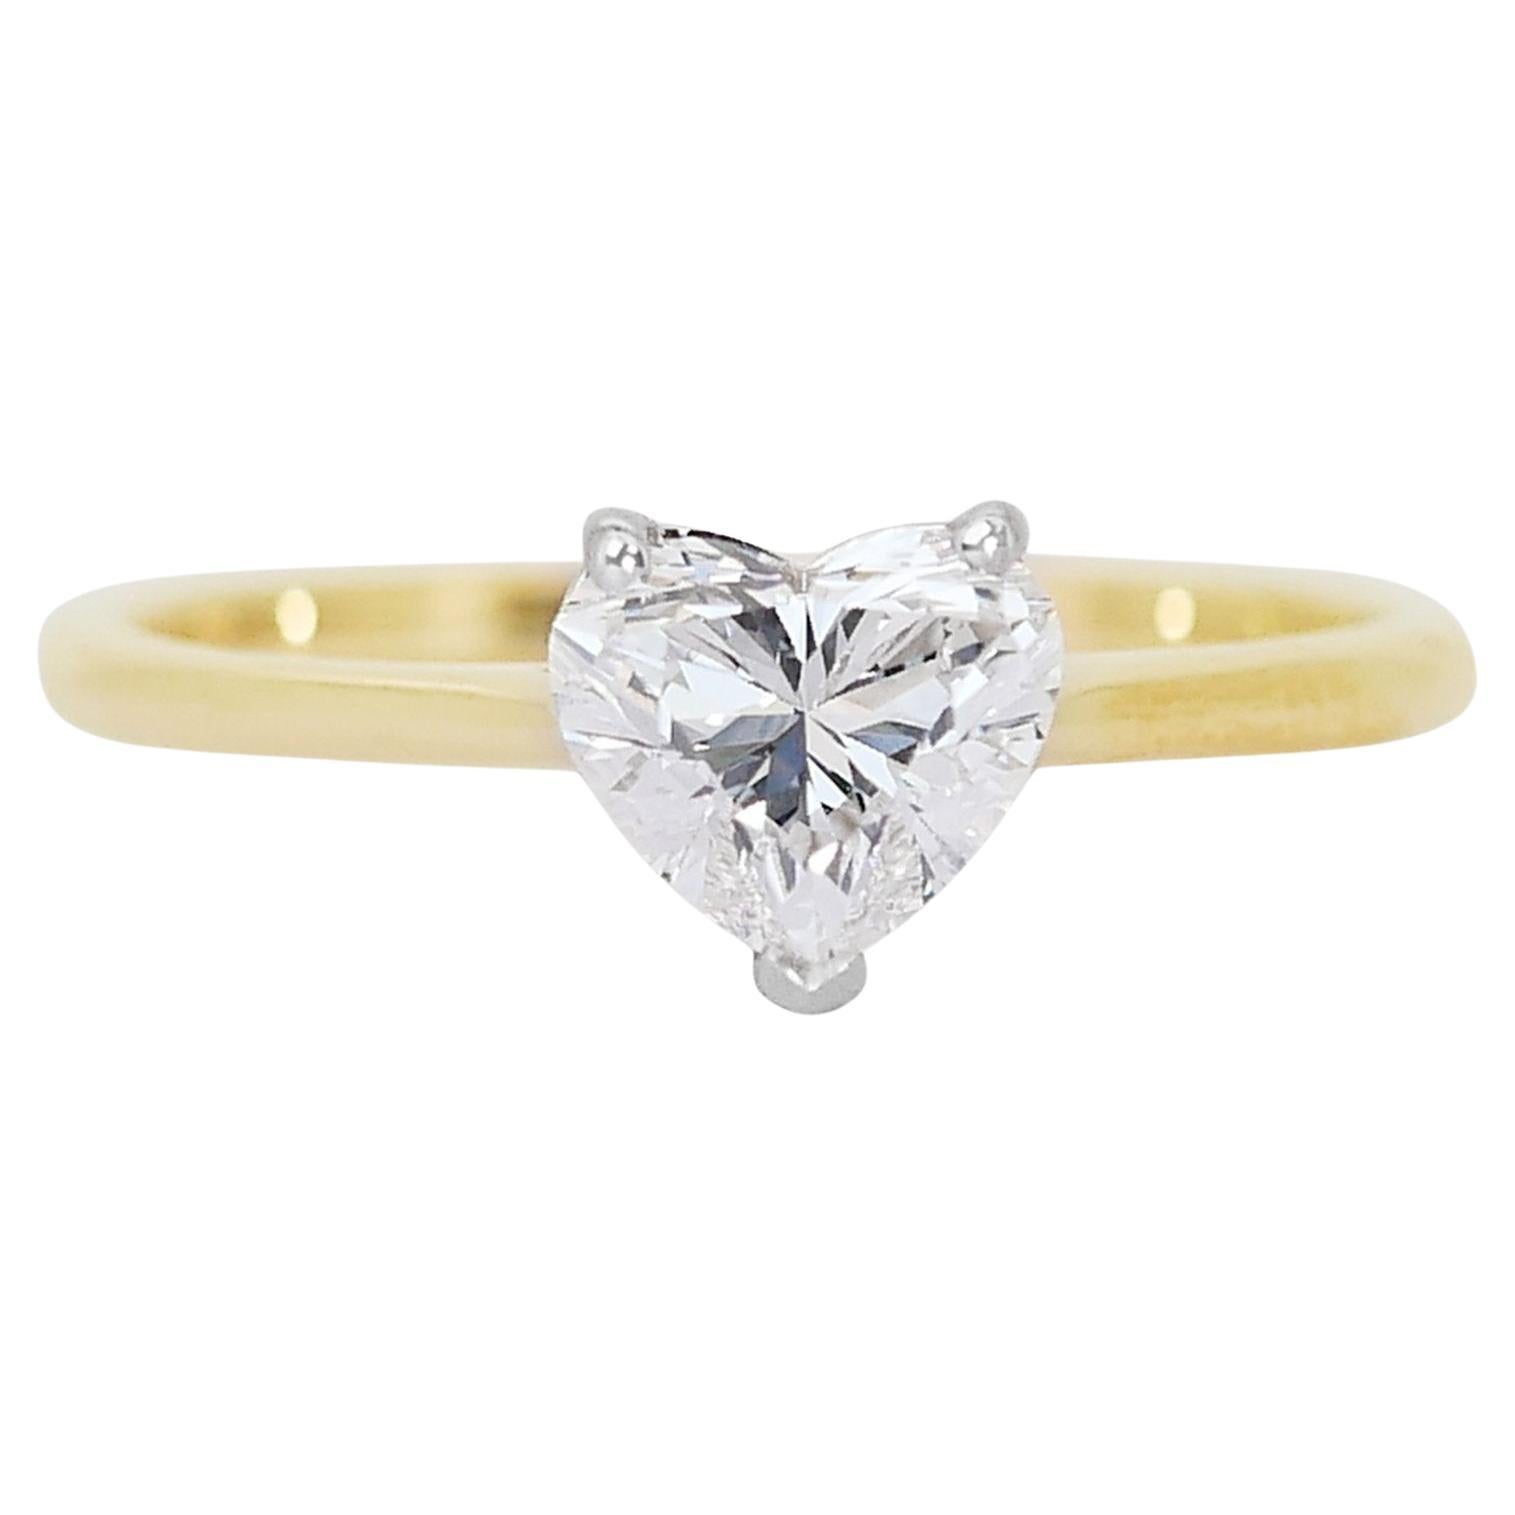 Charming 0.75 ct Heart-Shaped Diamond Solitaire Ring in 18k Yellow Gold – GIA 